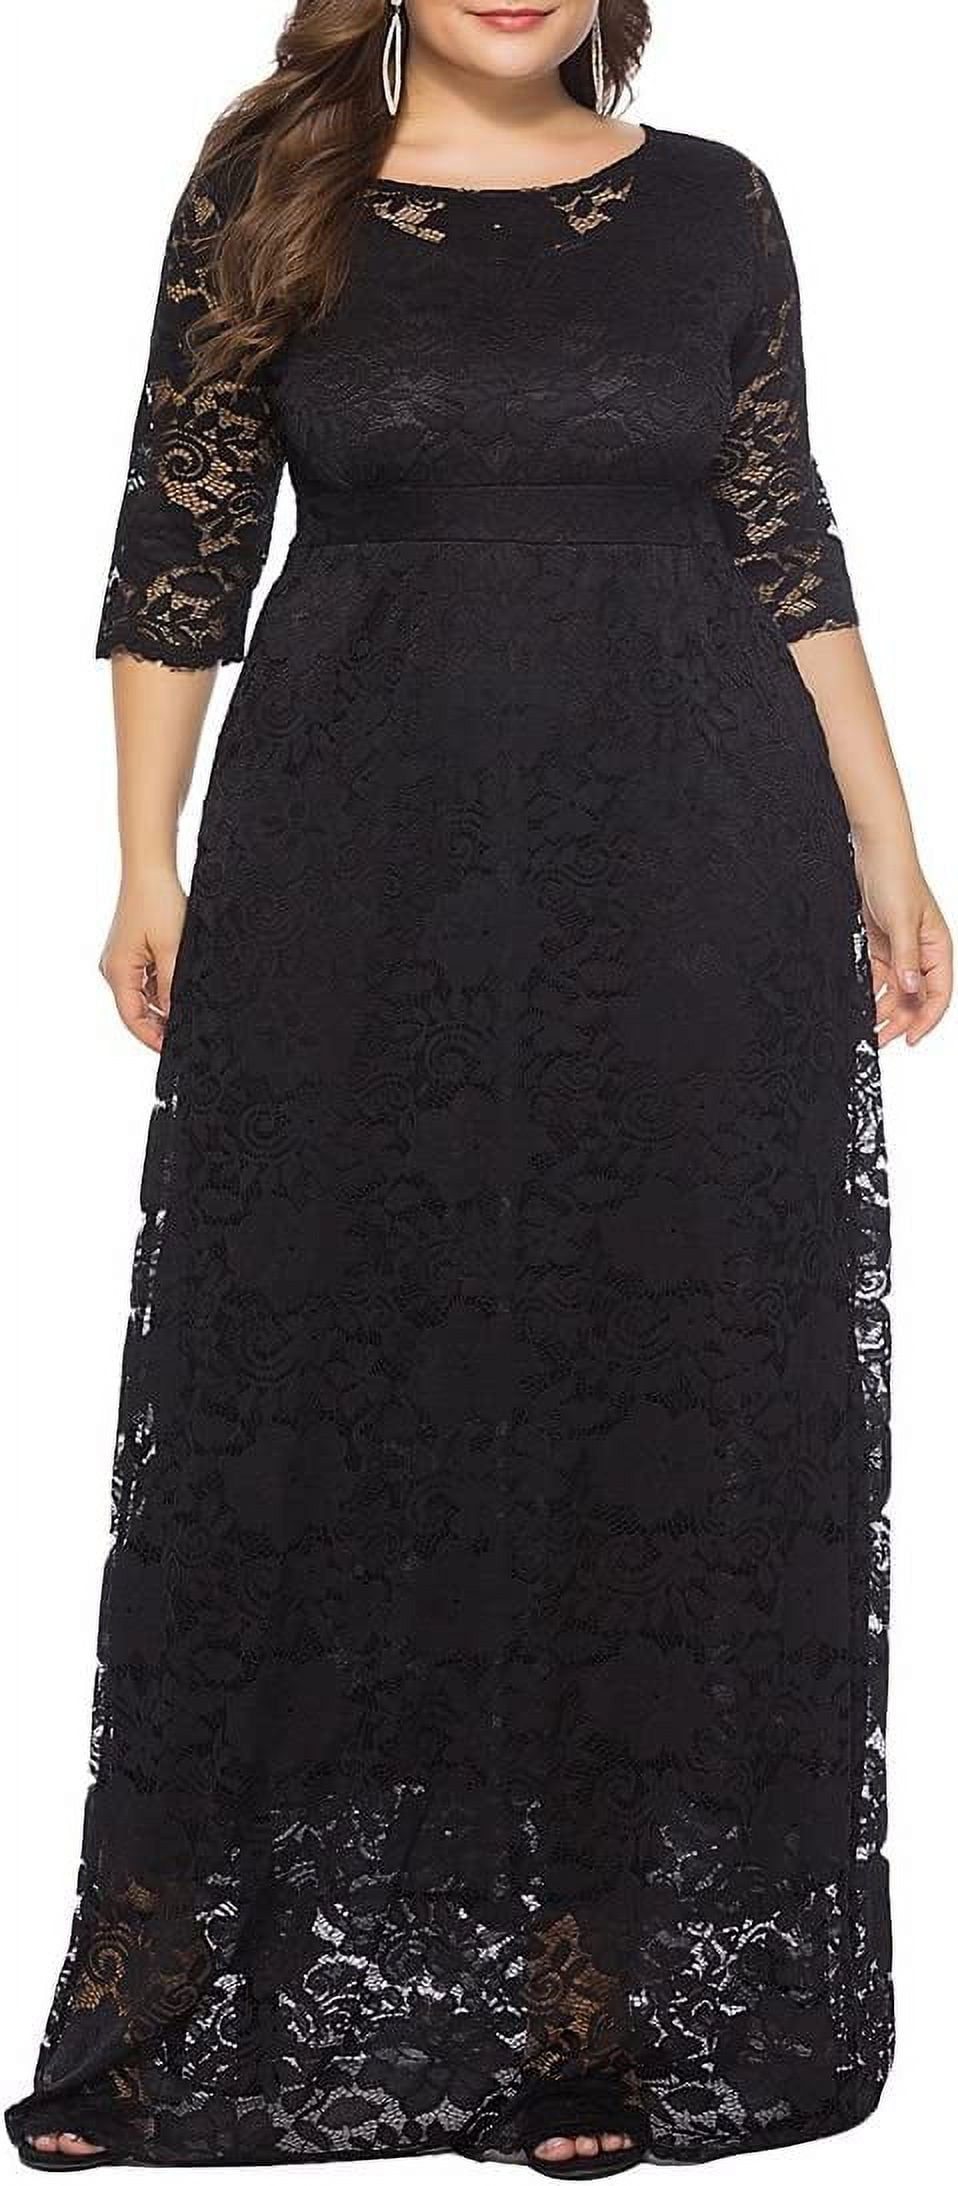 Eternatastic Womens Floral Lace 2/3 Sleeves Maxi Dress Evening Party ...